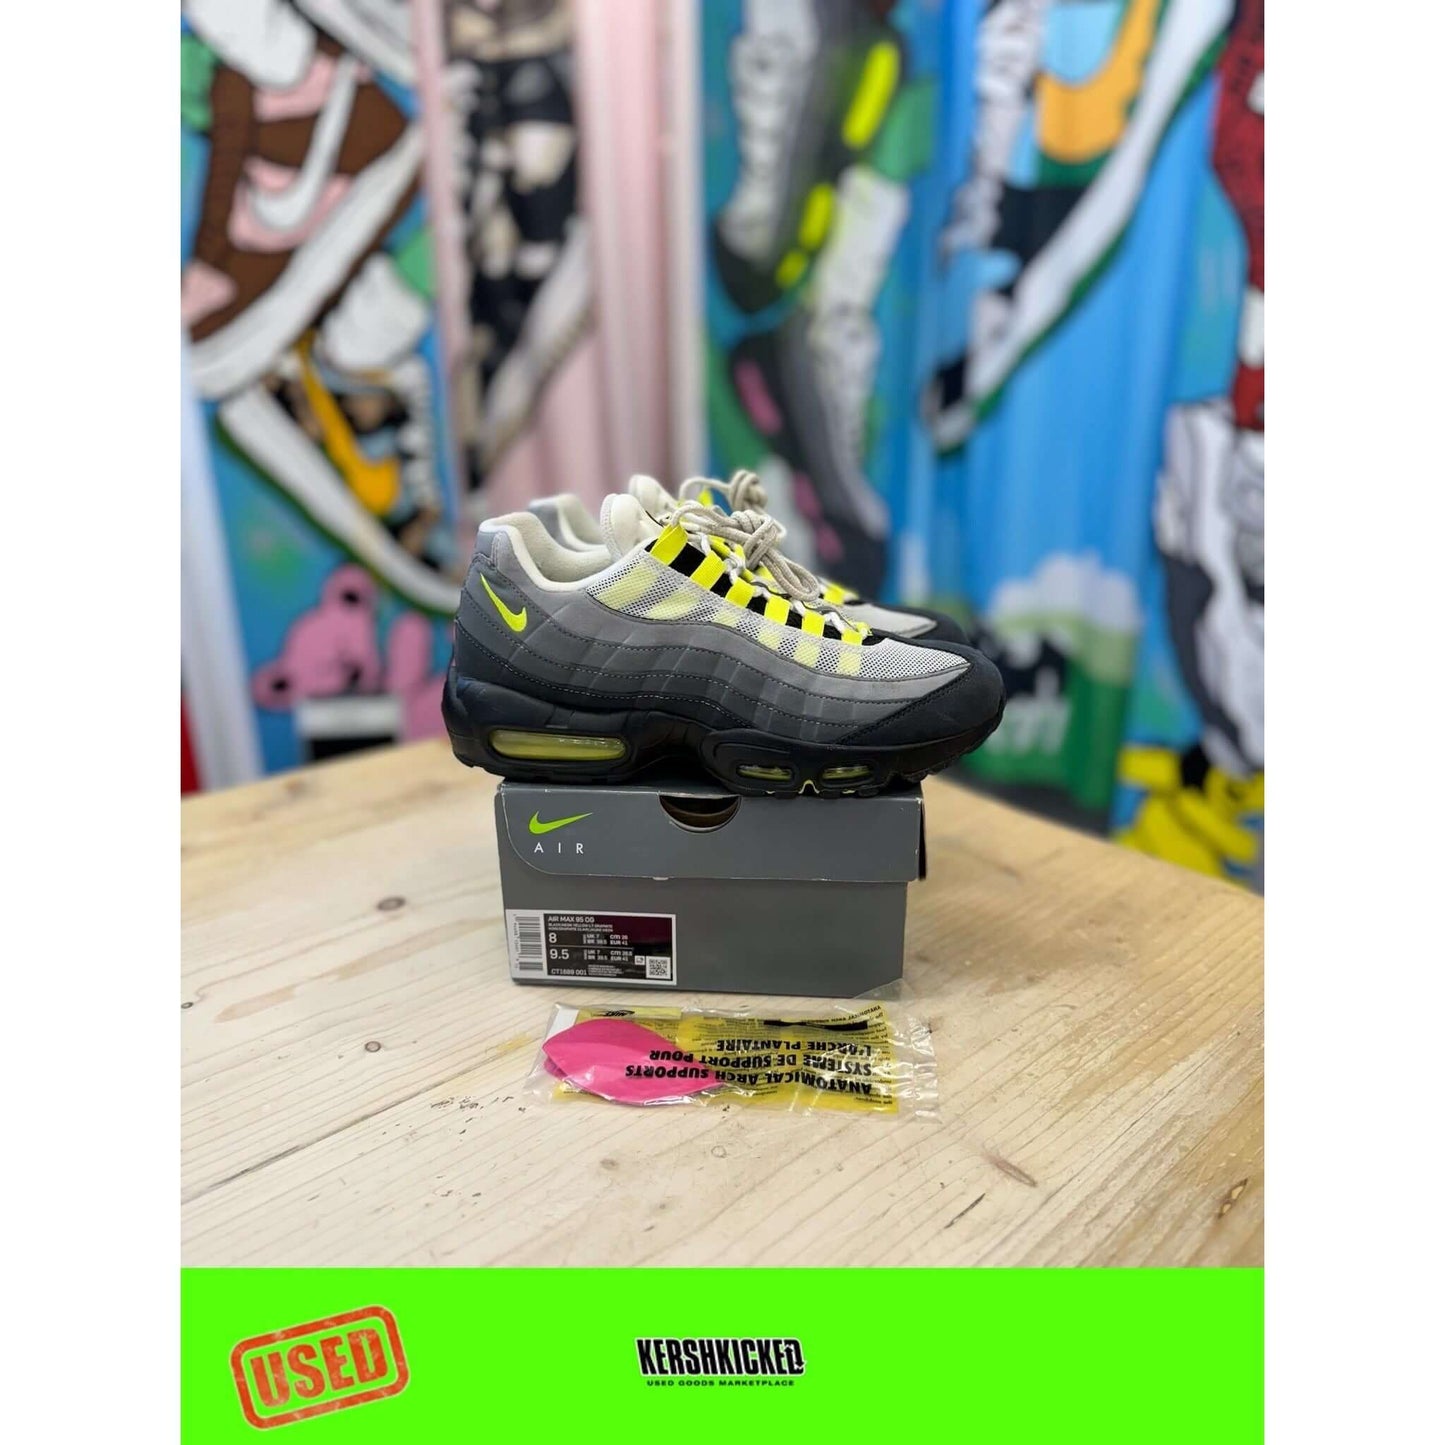 Air Max 95 OG Neon UK 7 by Nike from £200.00